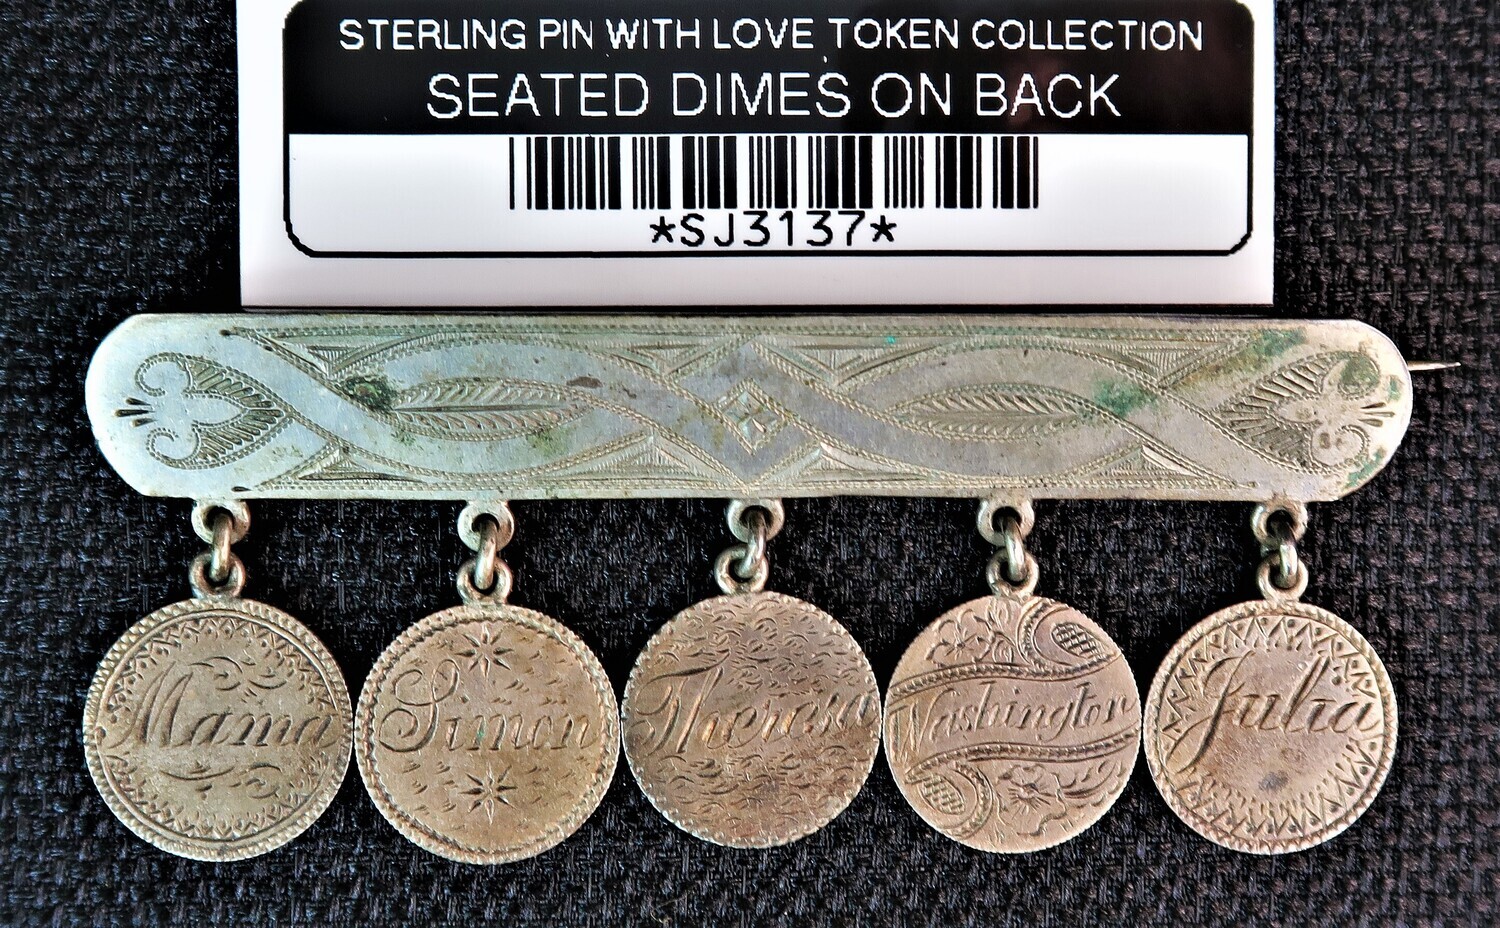 STERLING PIN WITH LOVE TOKEN COLLECTION SEATED DIMES ON BACK